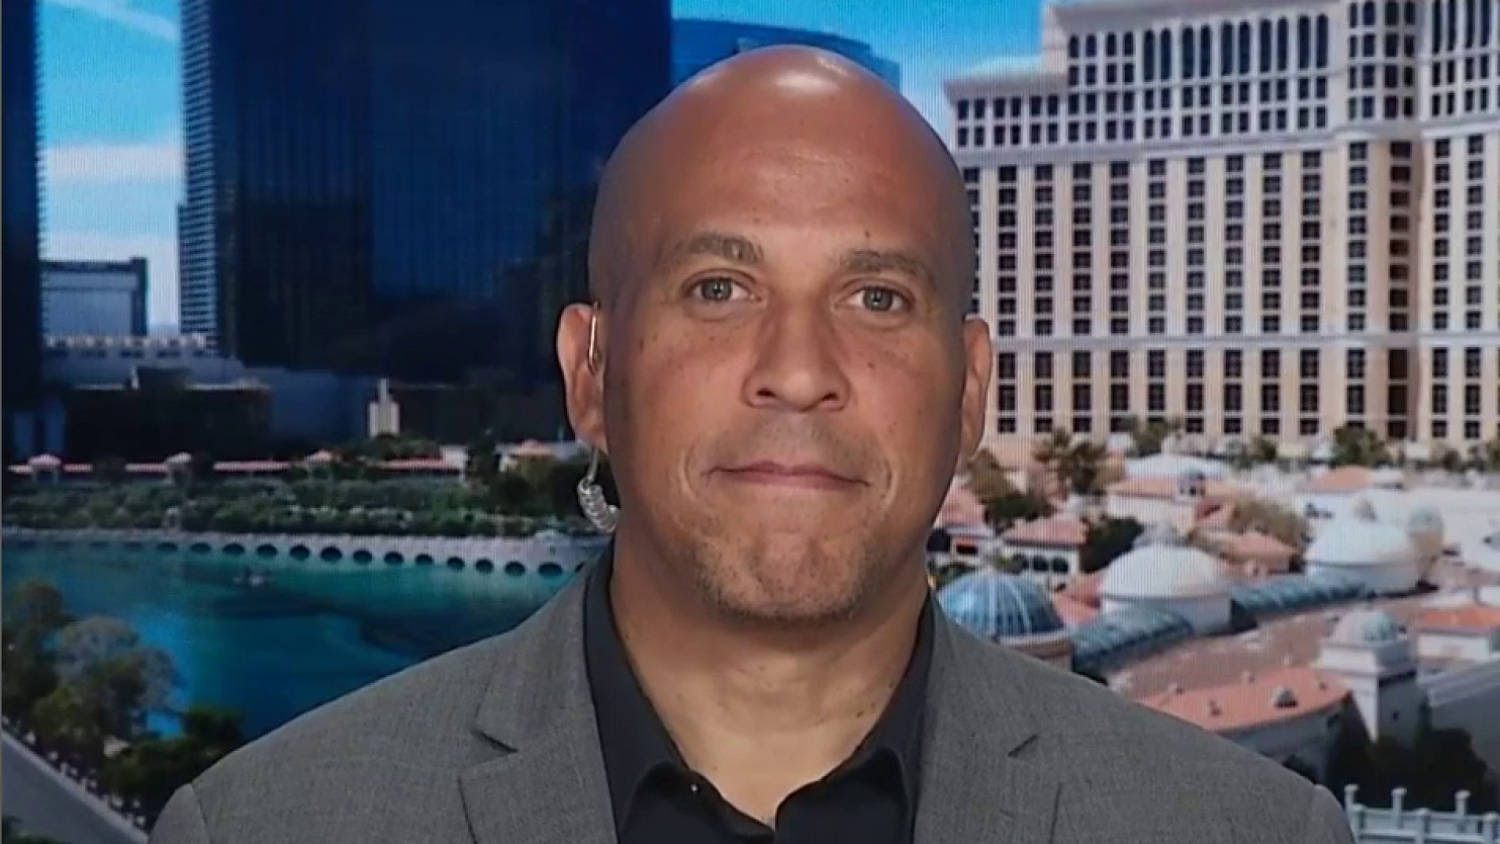 Sen. Cory Booker excited about possibility of Sen. Mark Kelly as VP Kamala Harris' running mate